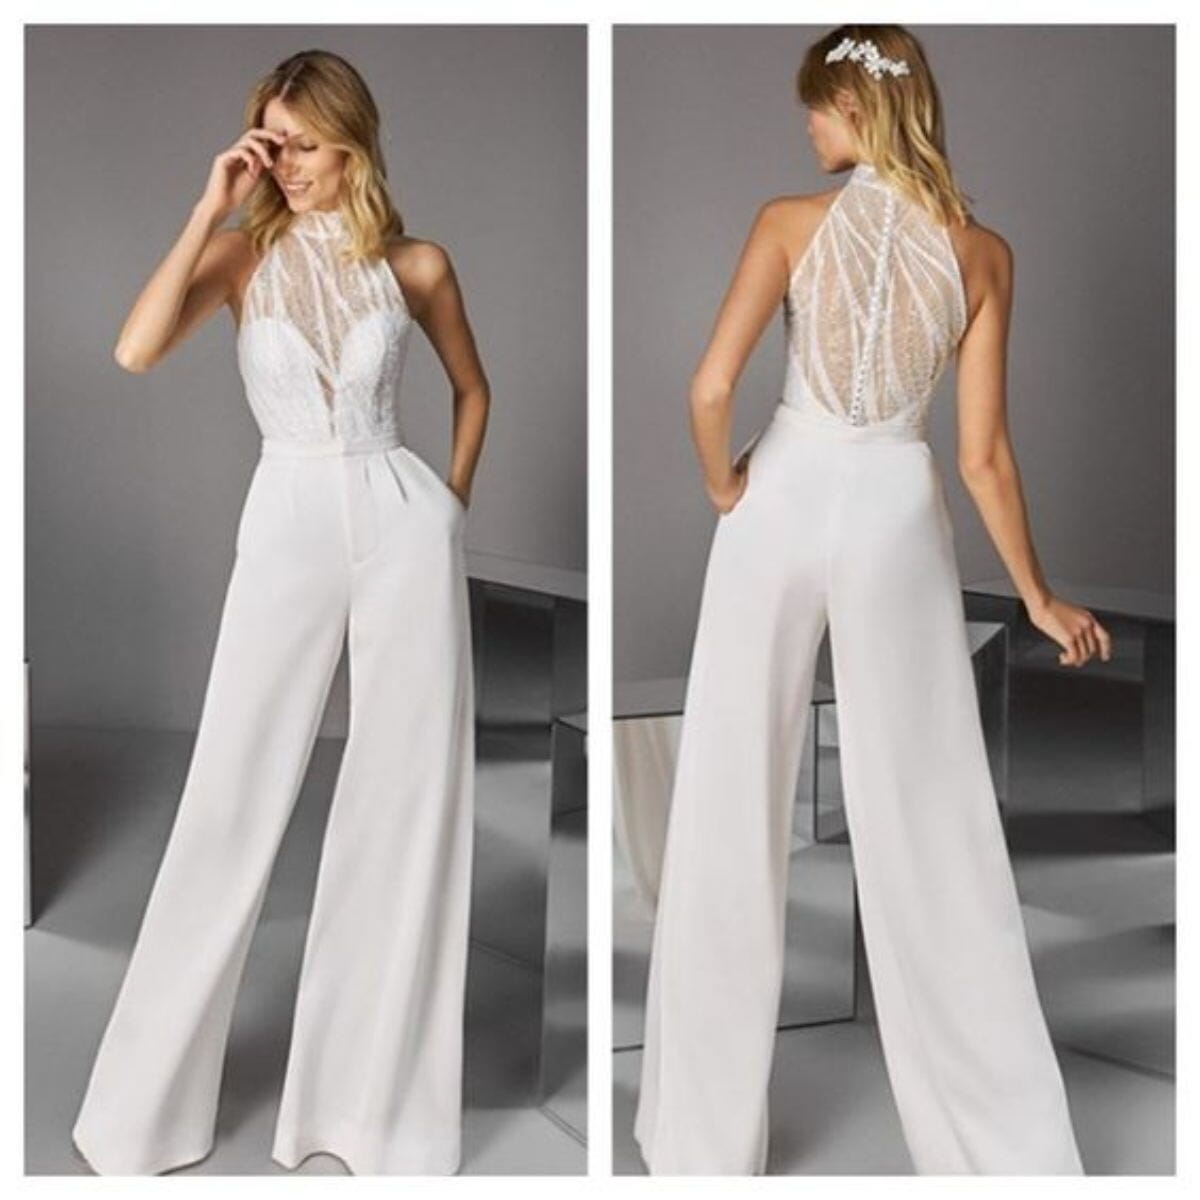 High Neck Sexy Illusion Sequins with Pants Jumpsuit Wedding Dress ...